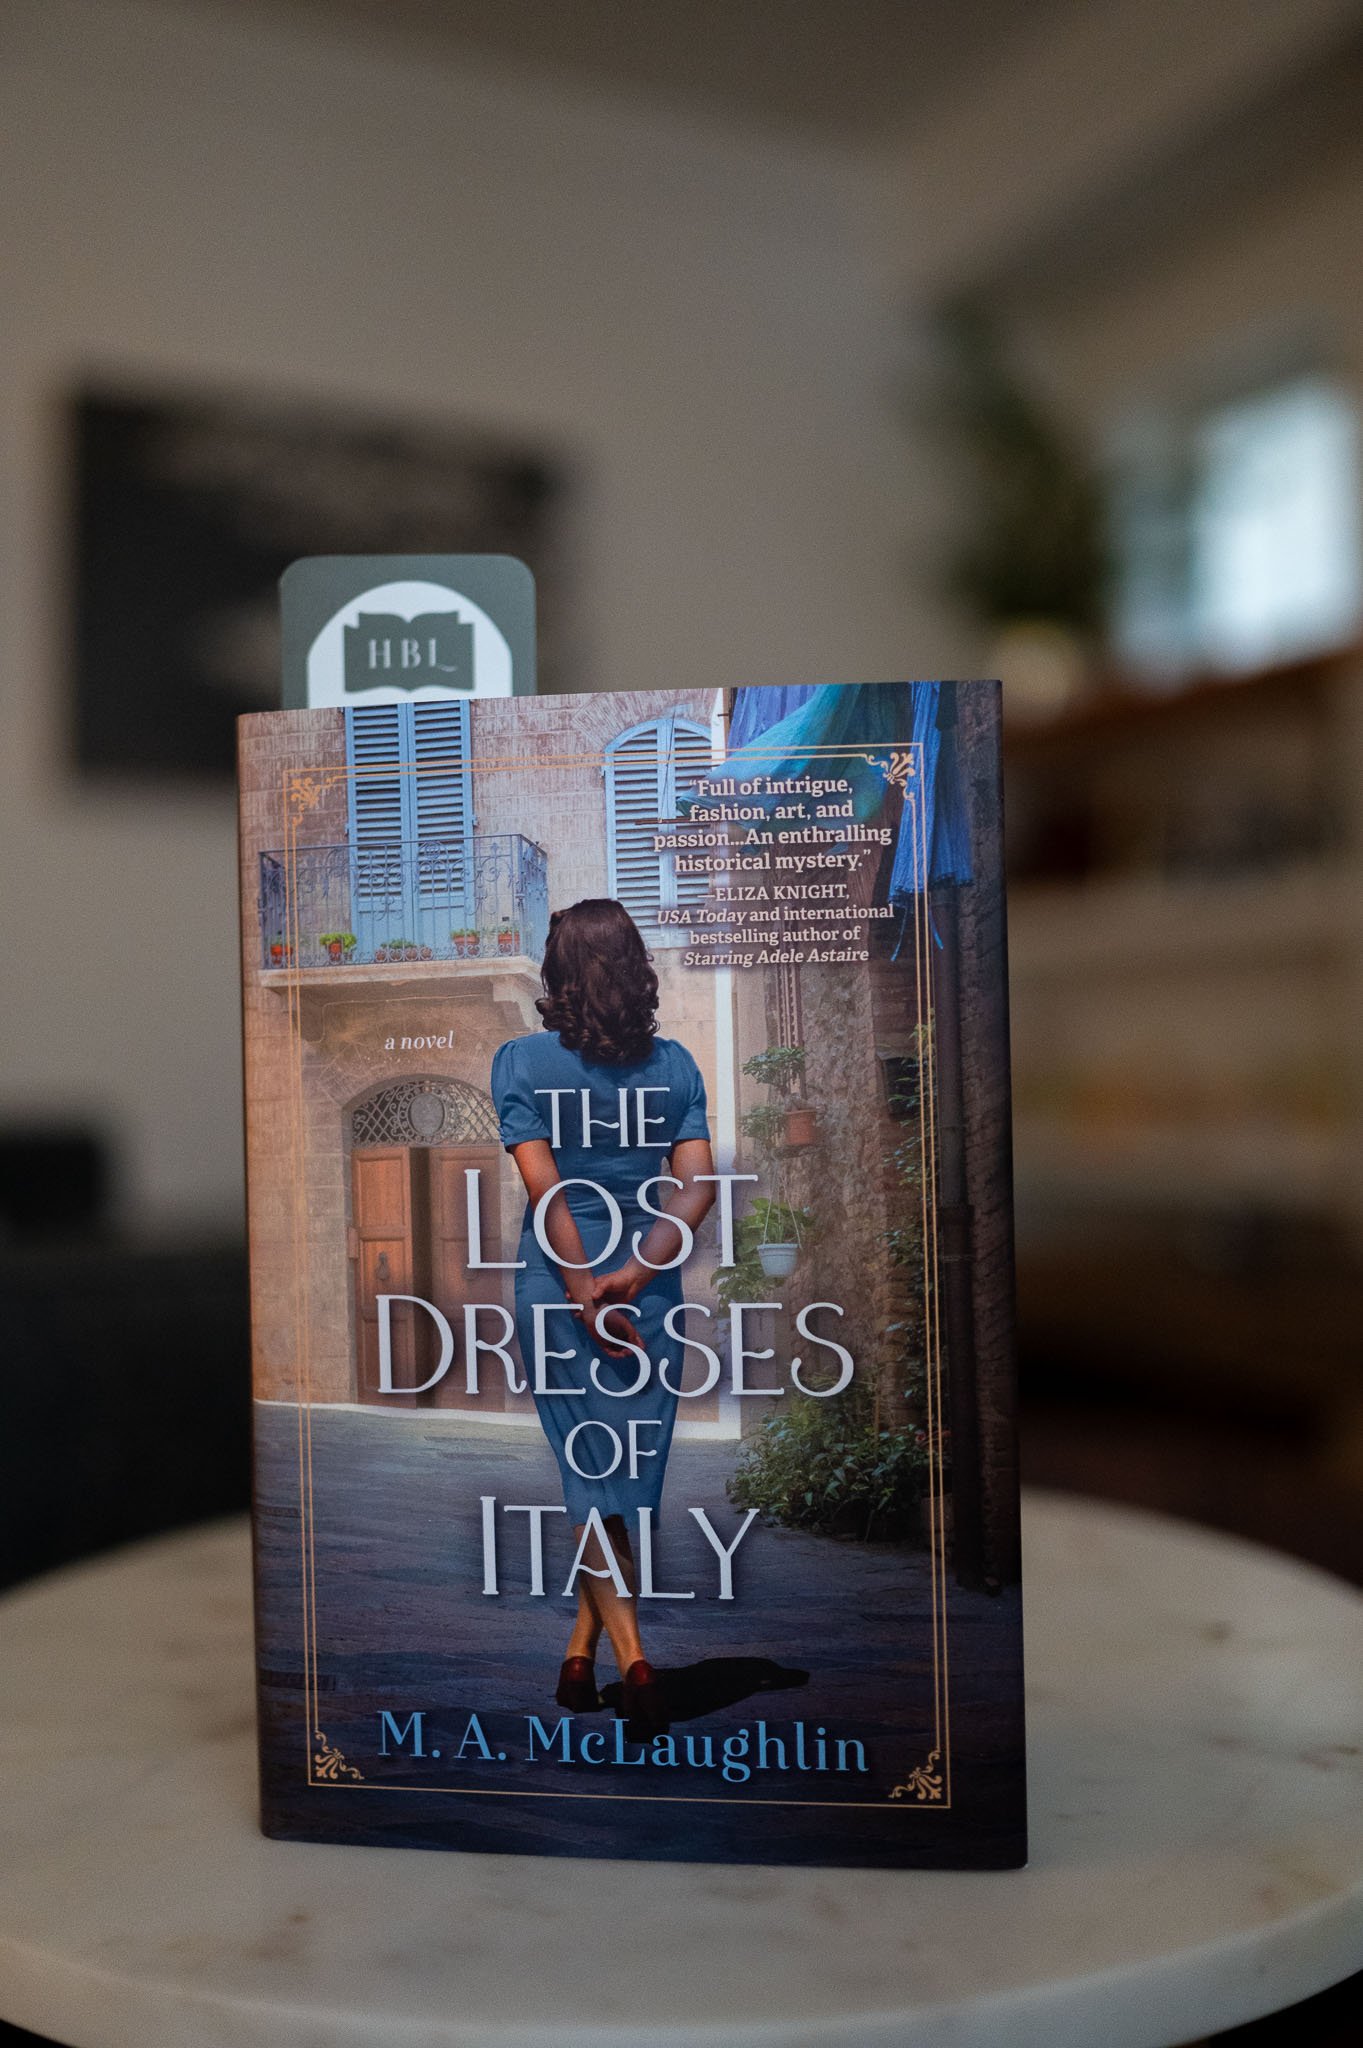 The Lost Dresses of Italy by M.A. McLaughlin